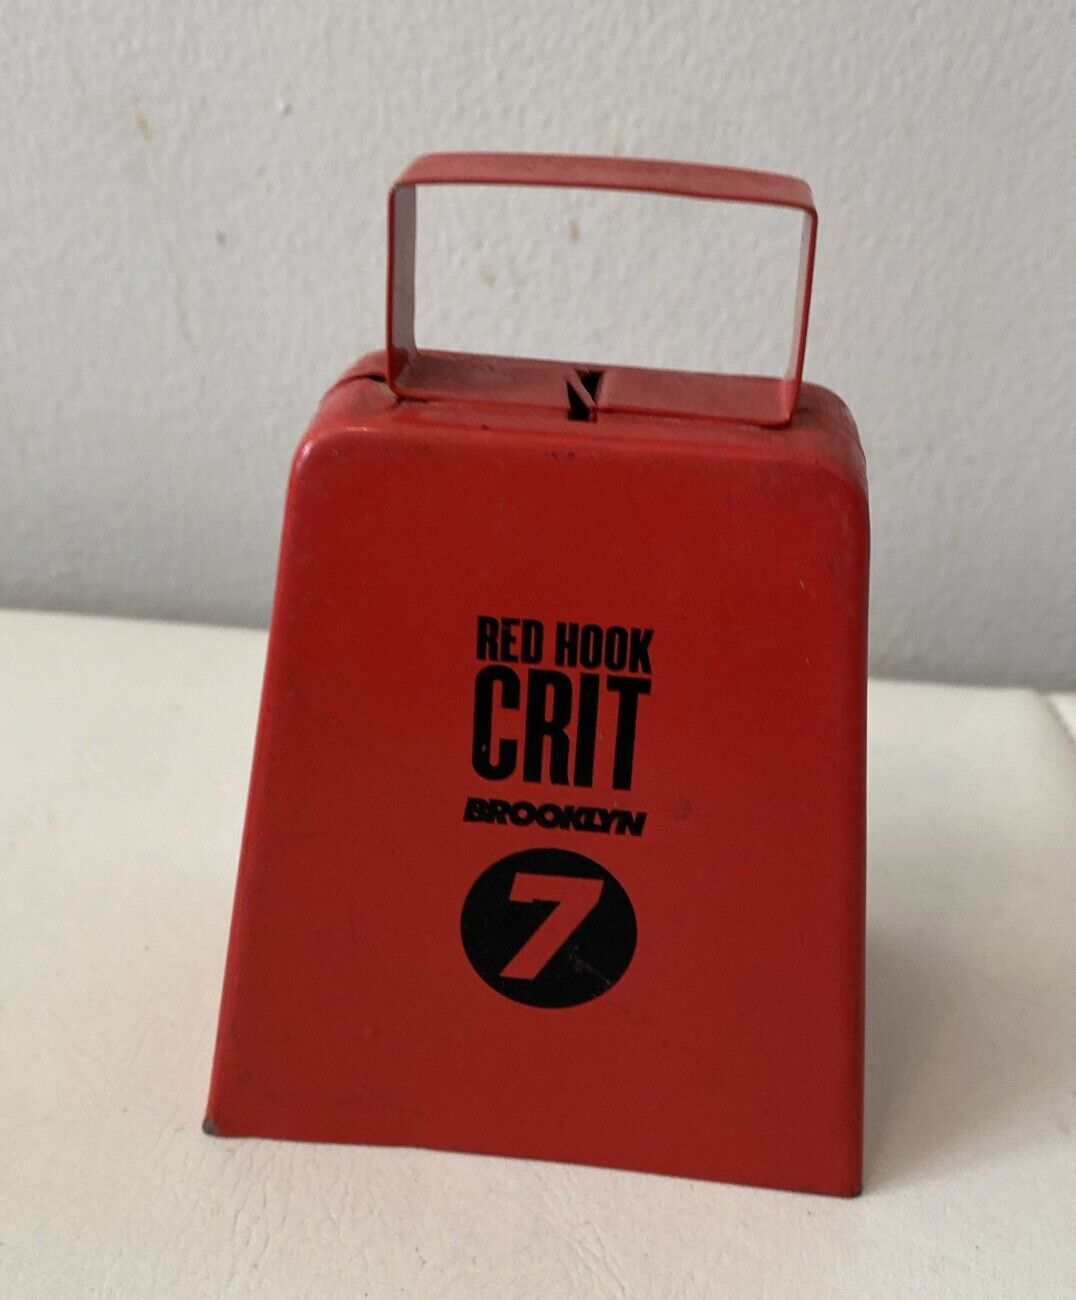 Rock Star Games Red Hook CRIT Brooklyn-7-  Cow Bell Rare